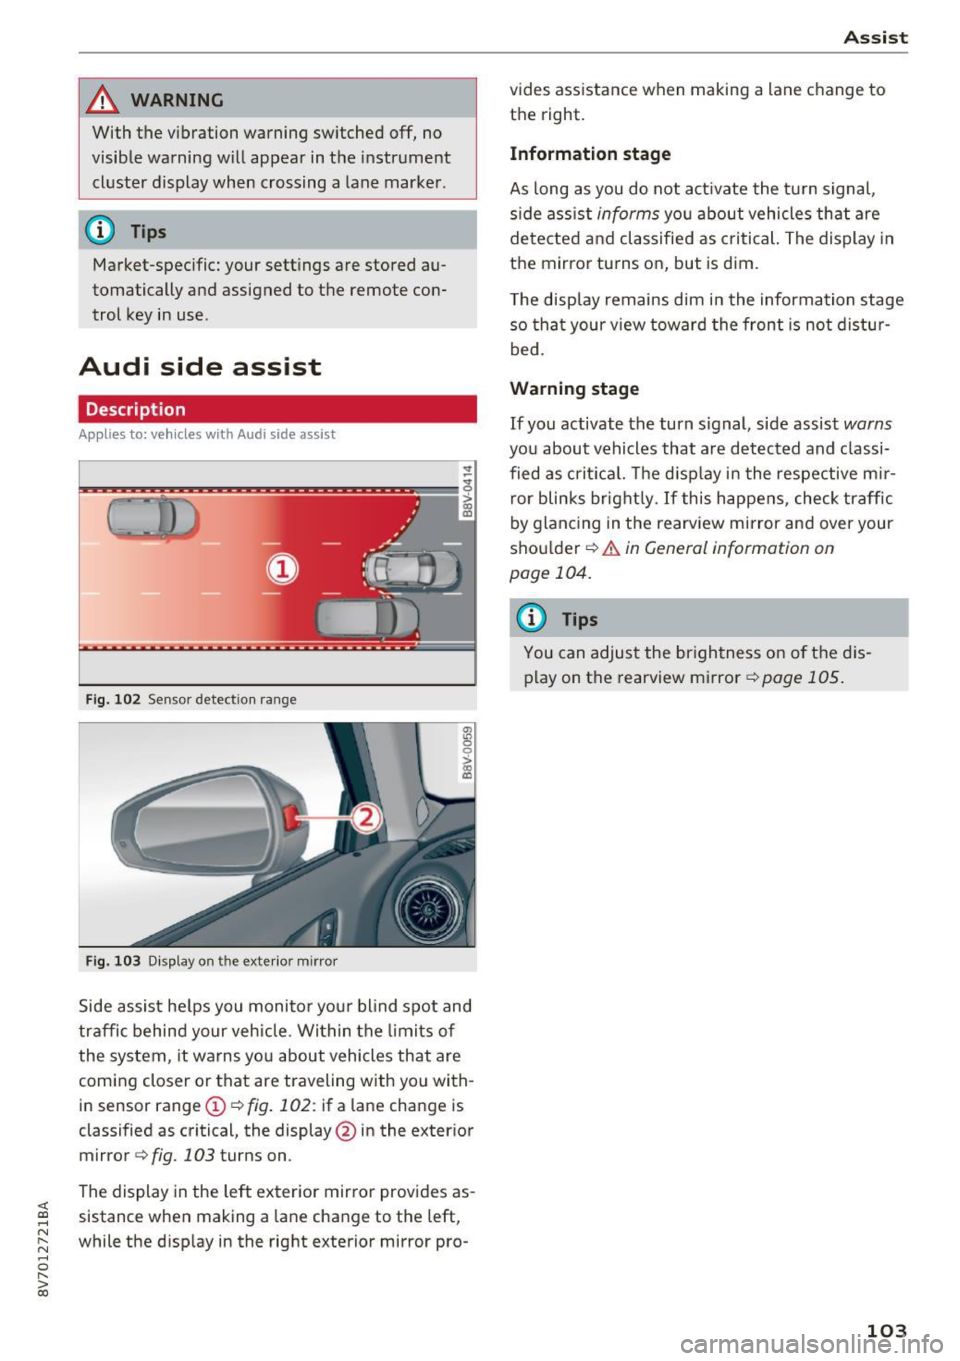 AUDI A3 CABRIOLET 2016  Owners Manual <( co ..... N 
" N ..... 0 r--. > 00 
_& WARNING 
With  the  vibration  warning  switched  off,  no 
visible  warning  will appear  in the  instrument 
cluster  display  when  crossing  a  lane marker